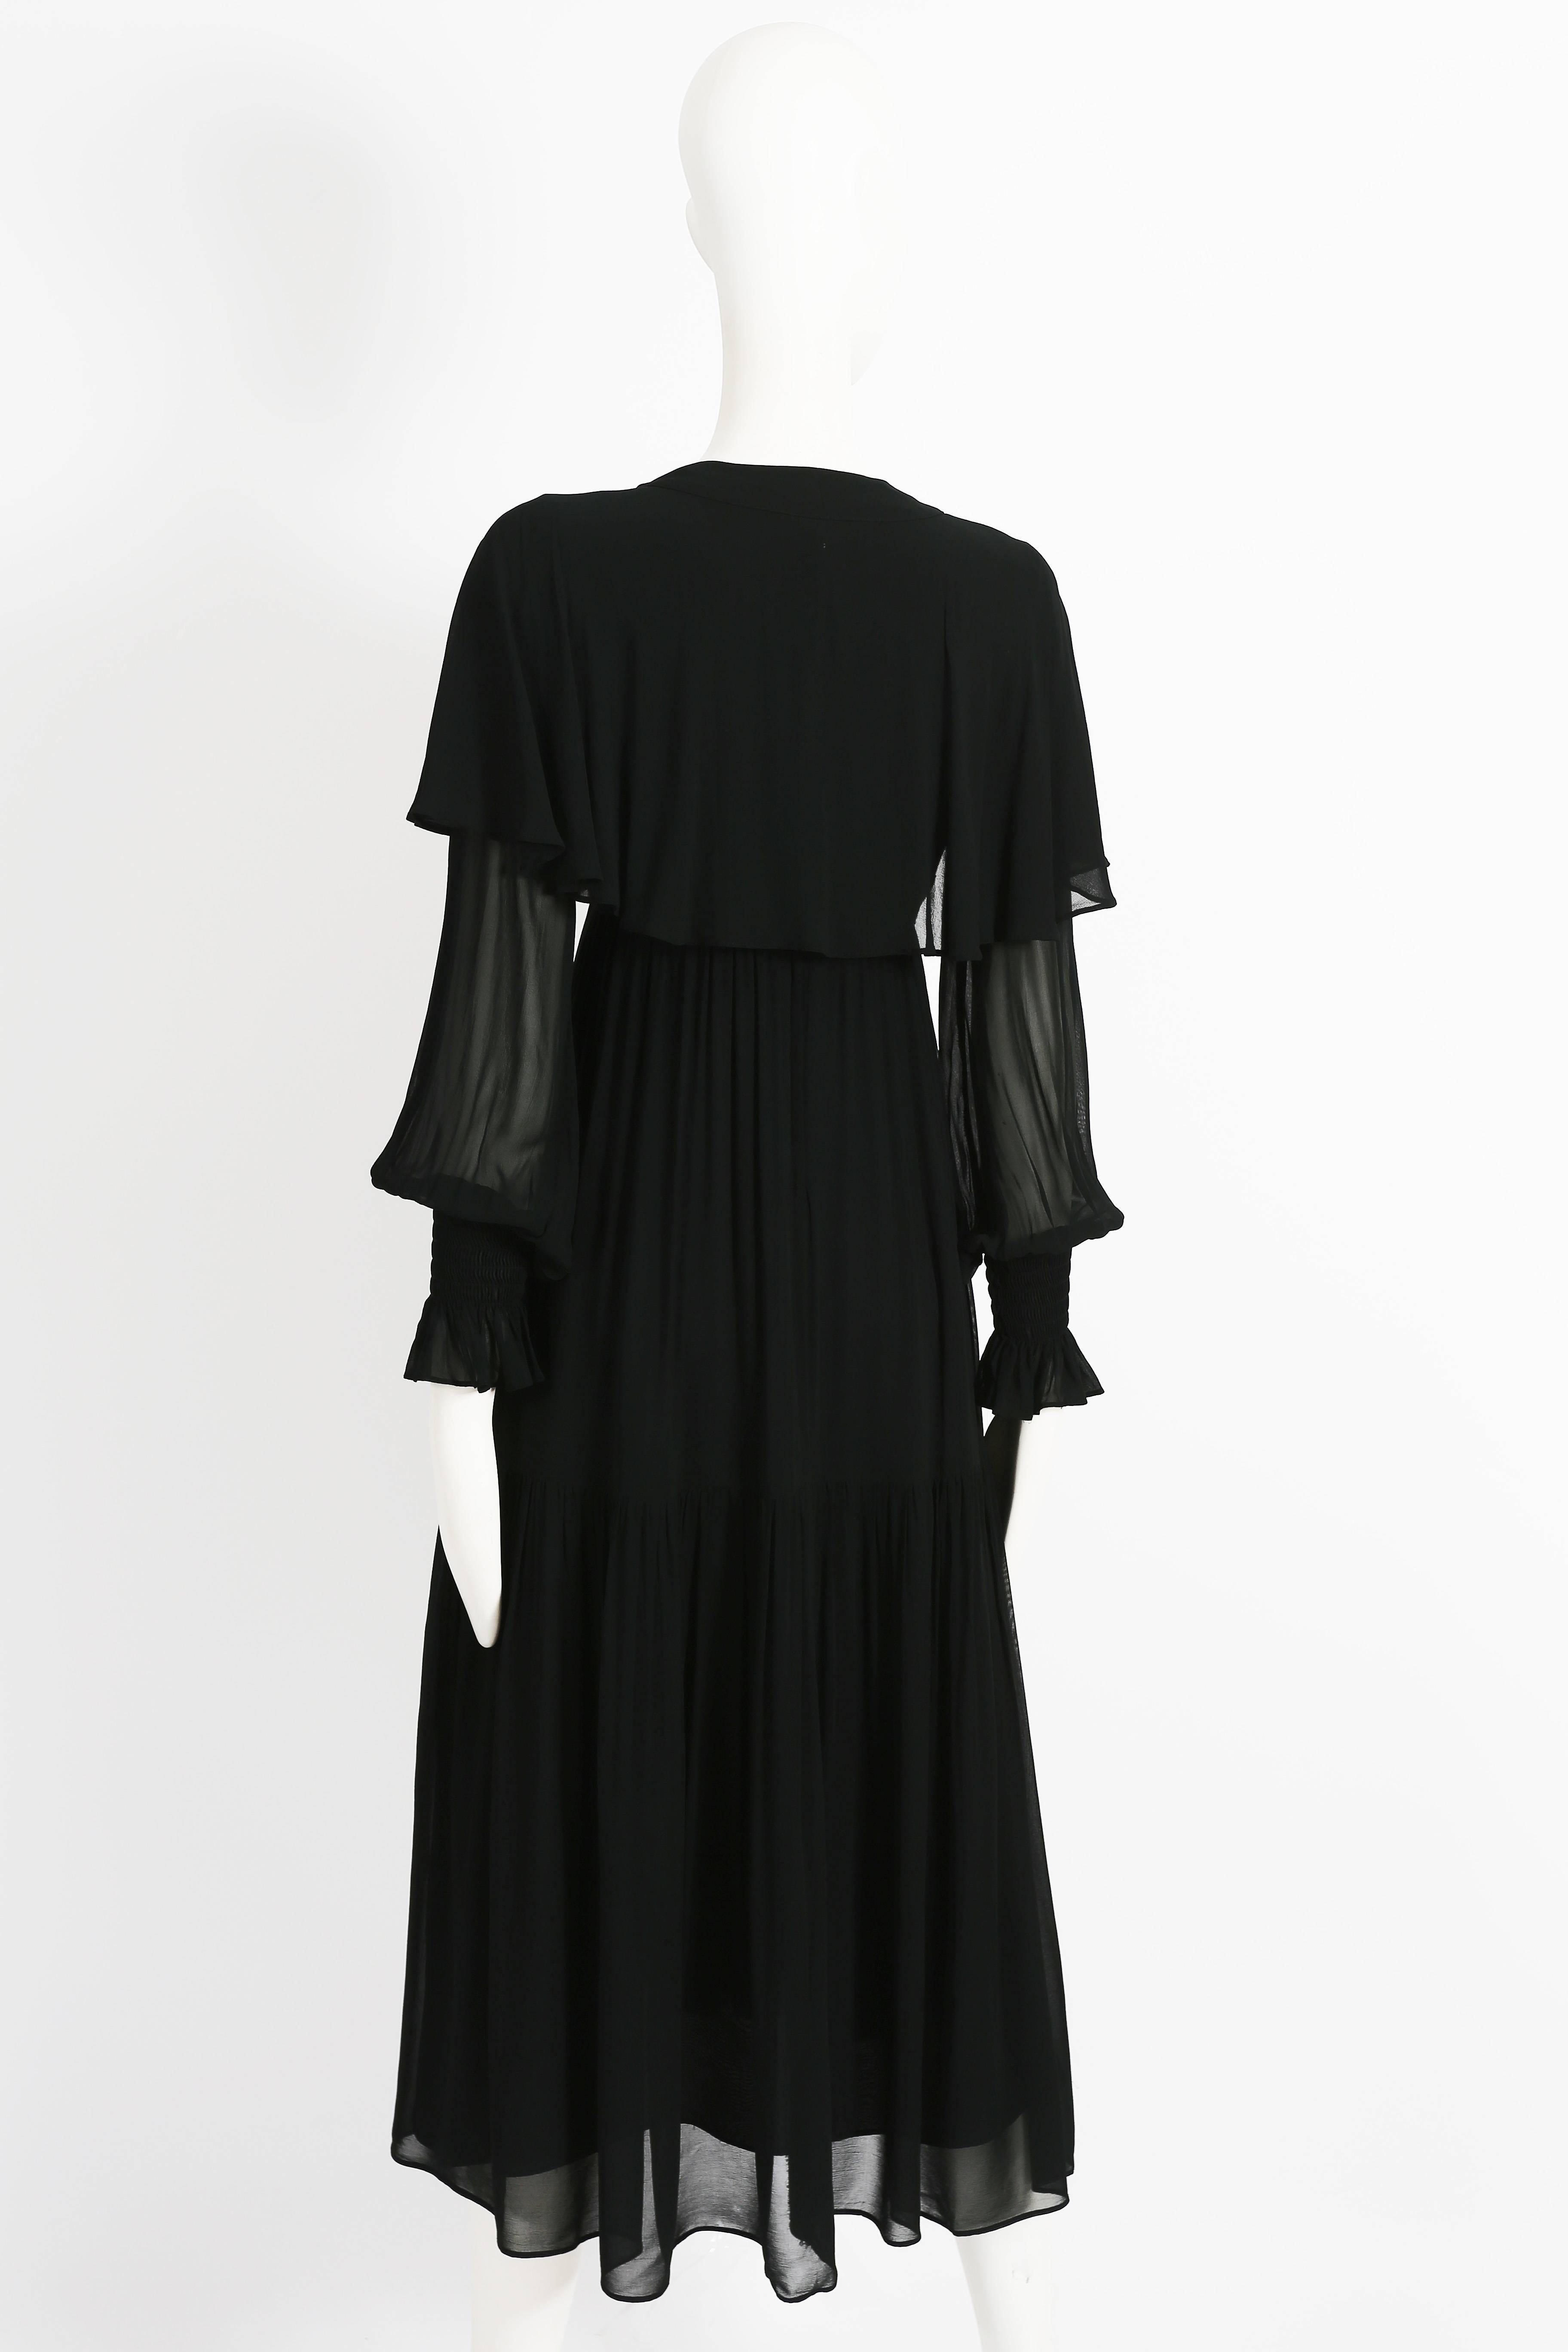 Ossie Clark black chiffon tiered evening dress with capelet, circa 1972 3